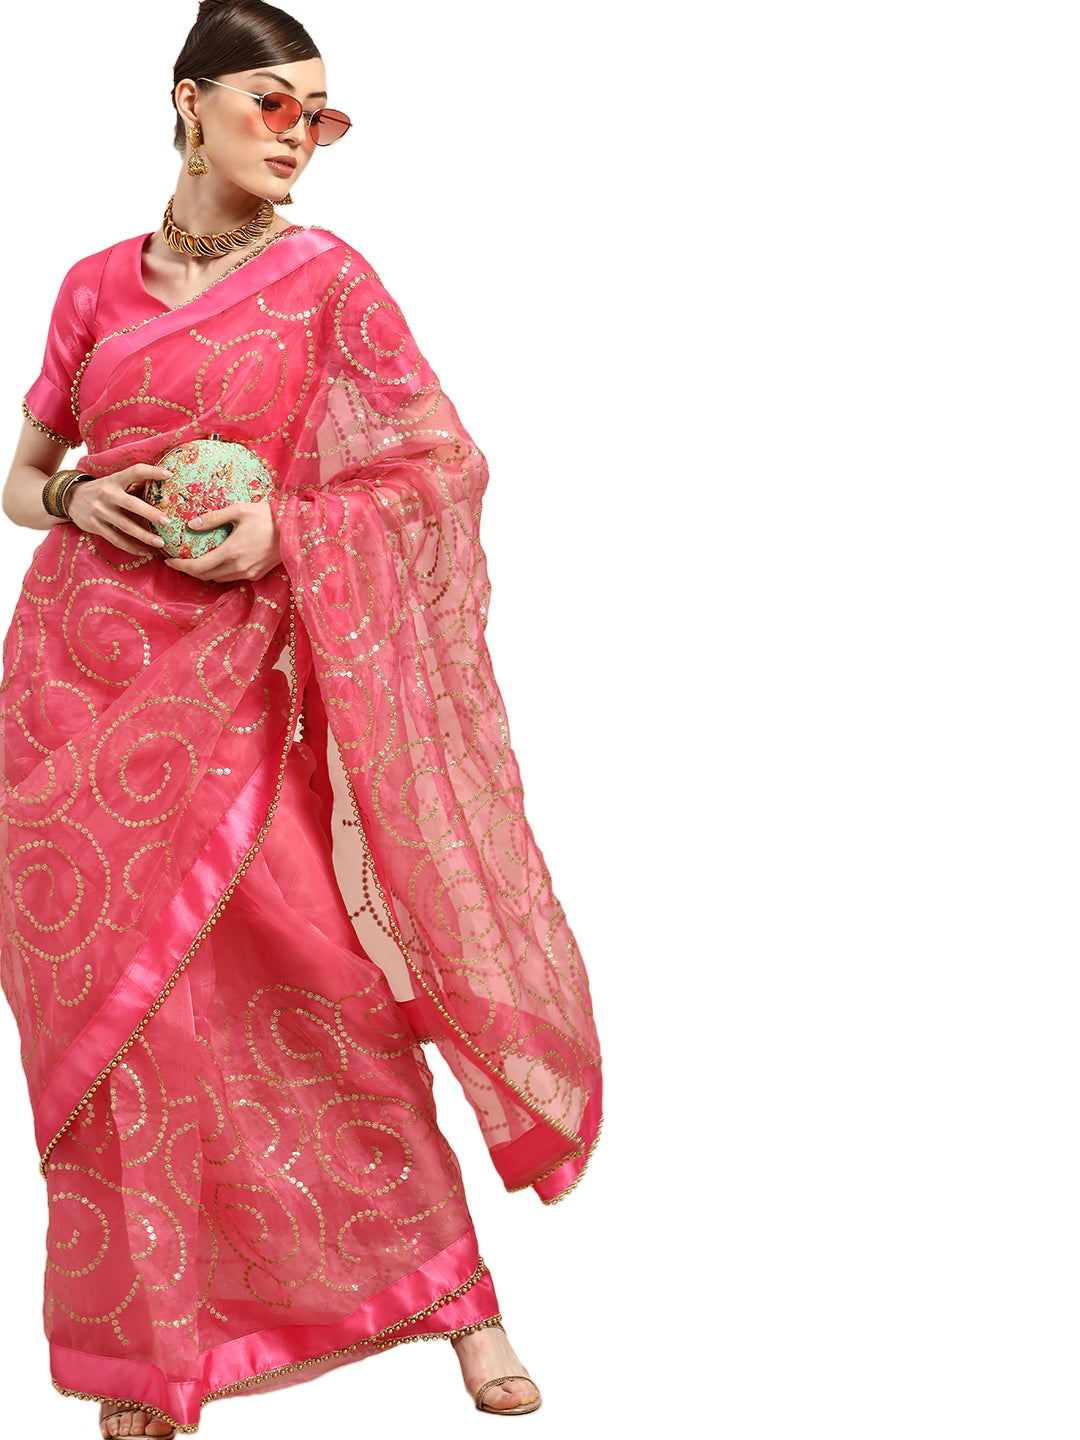 Organza Embellished With Sequins Pink Saree